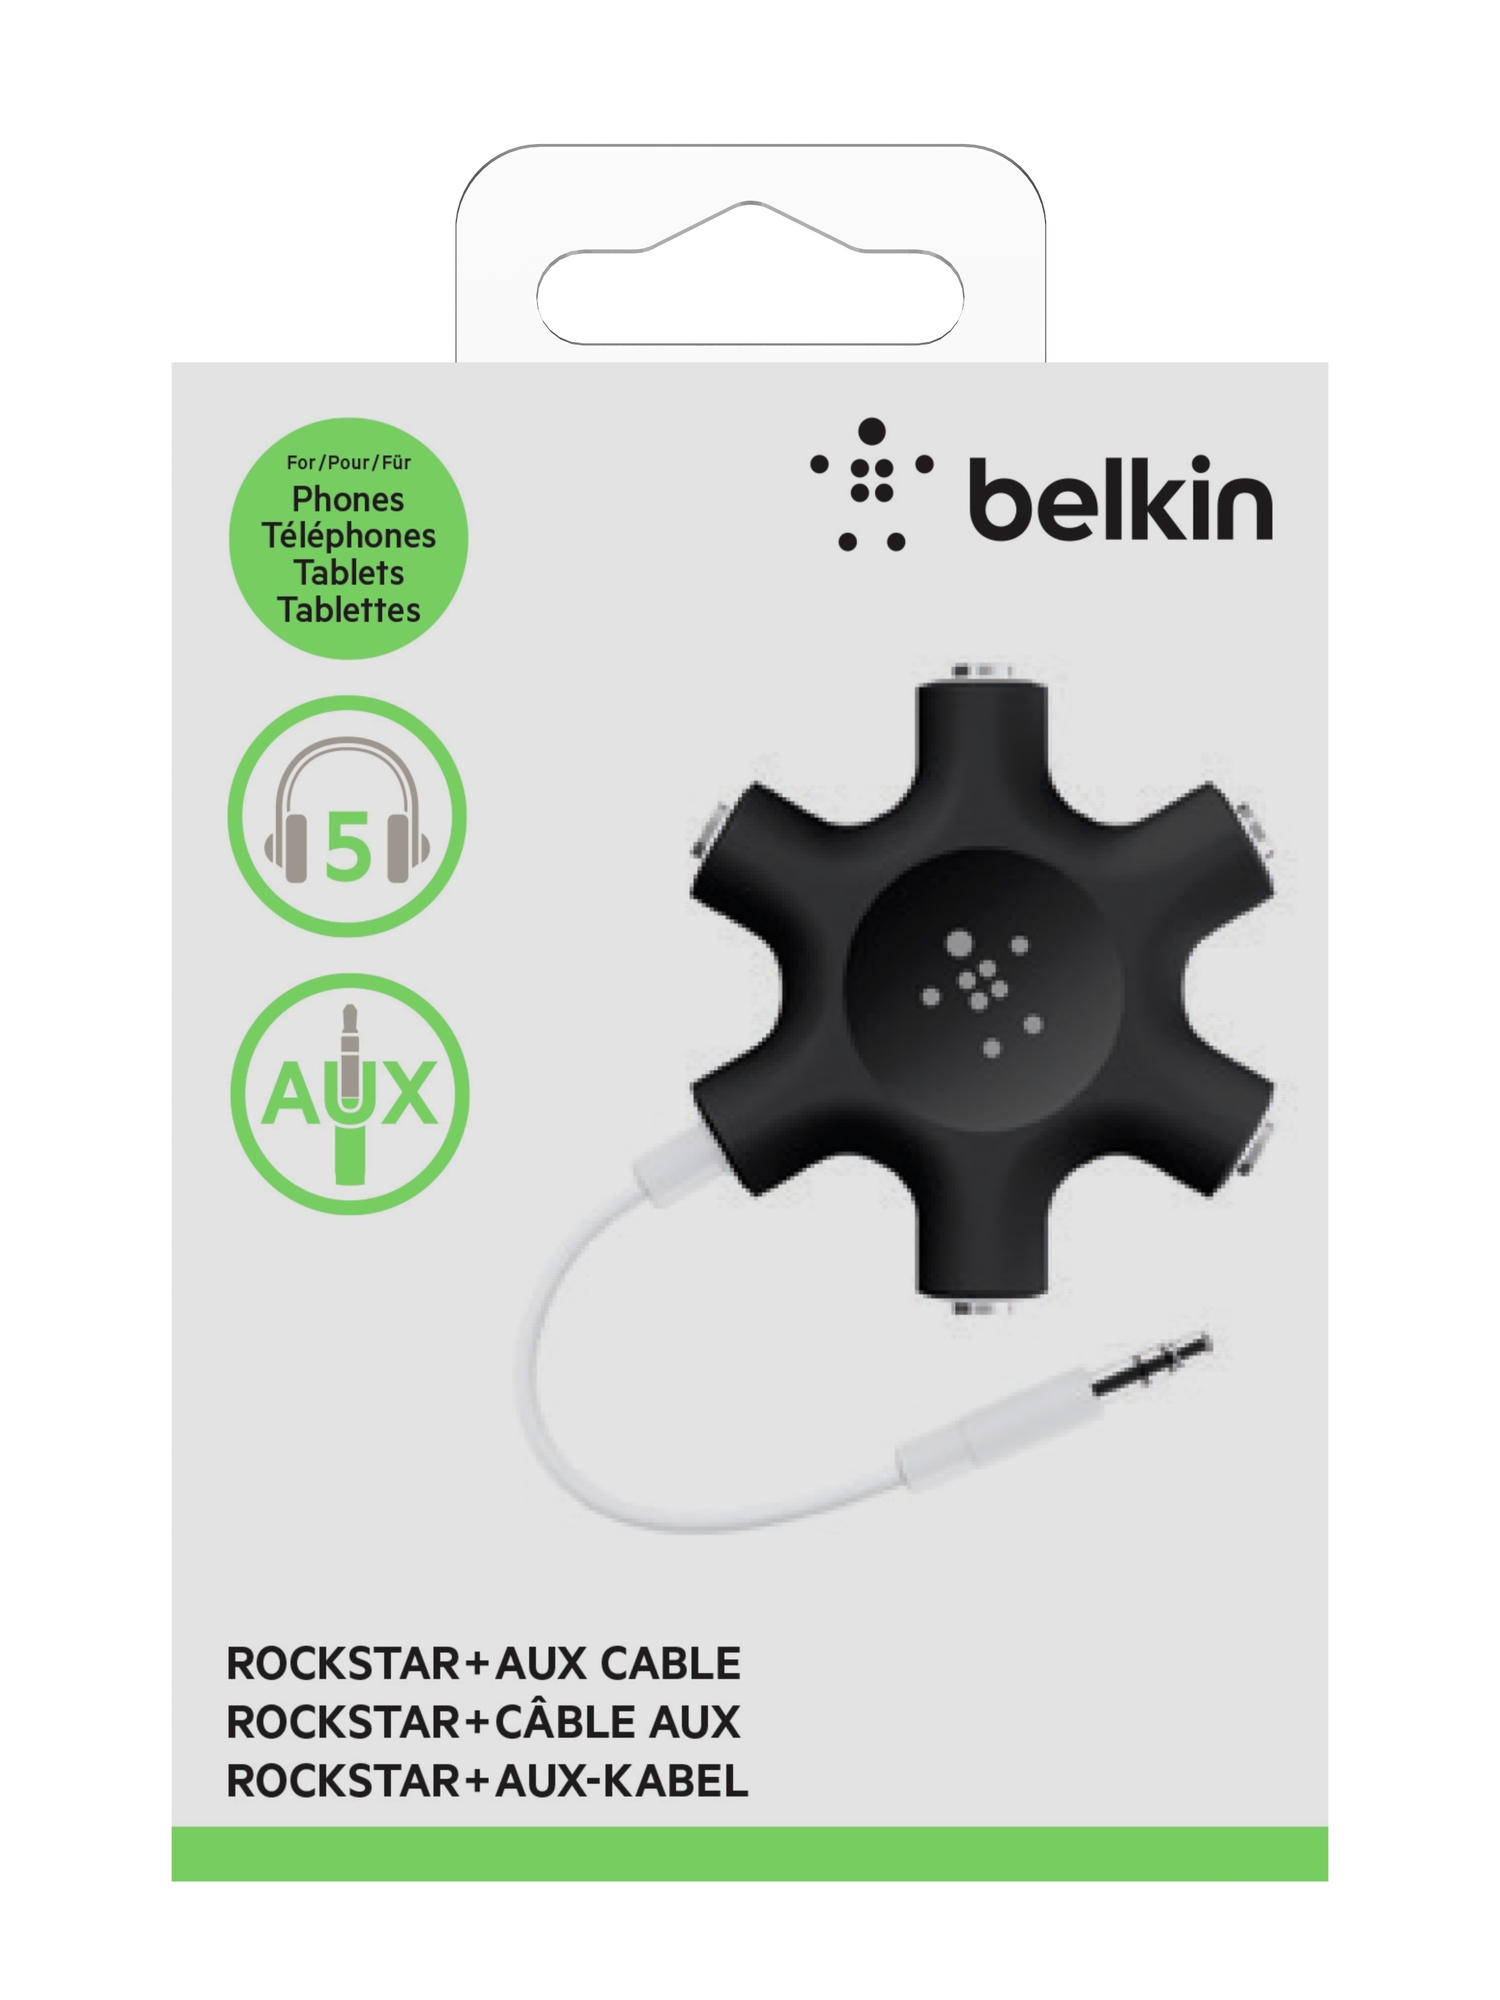 Belkin Rockstar 5-Jack Multi Headphone Audio Splitter - Headphone Splitter Designed To Connect Up To 5 Devices For Classrooms, Audio Mixing & Shared Experiences - For iPhone, iPad & More - image 3 of 5